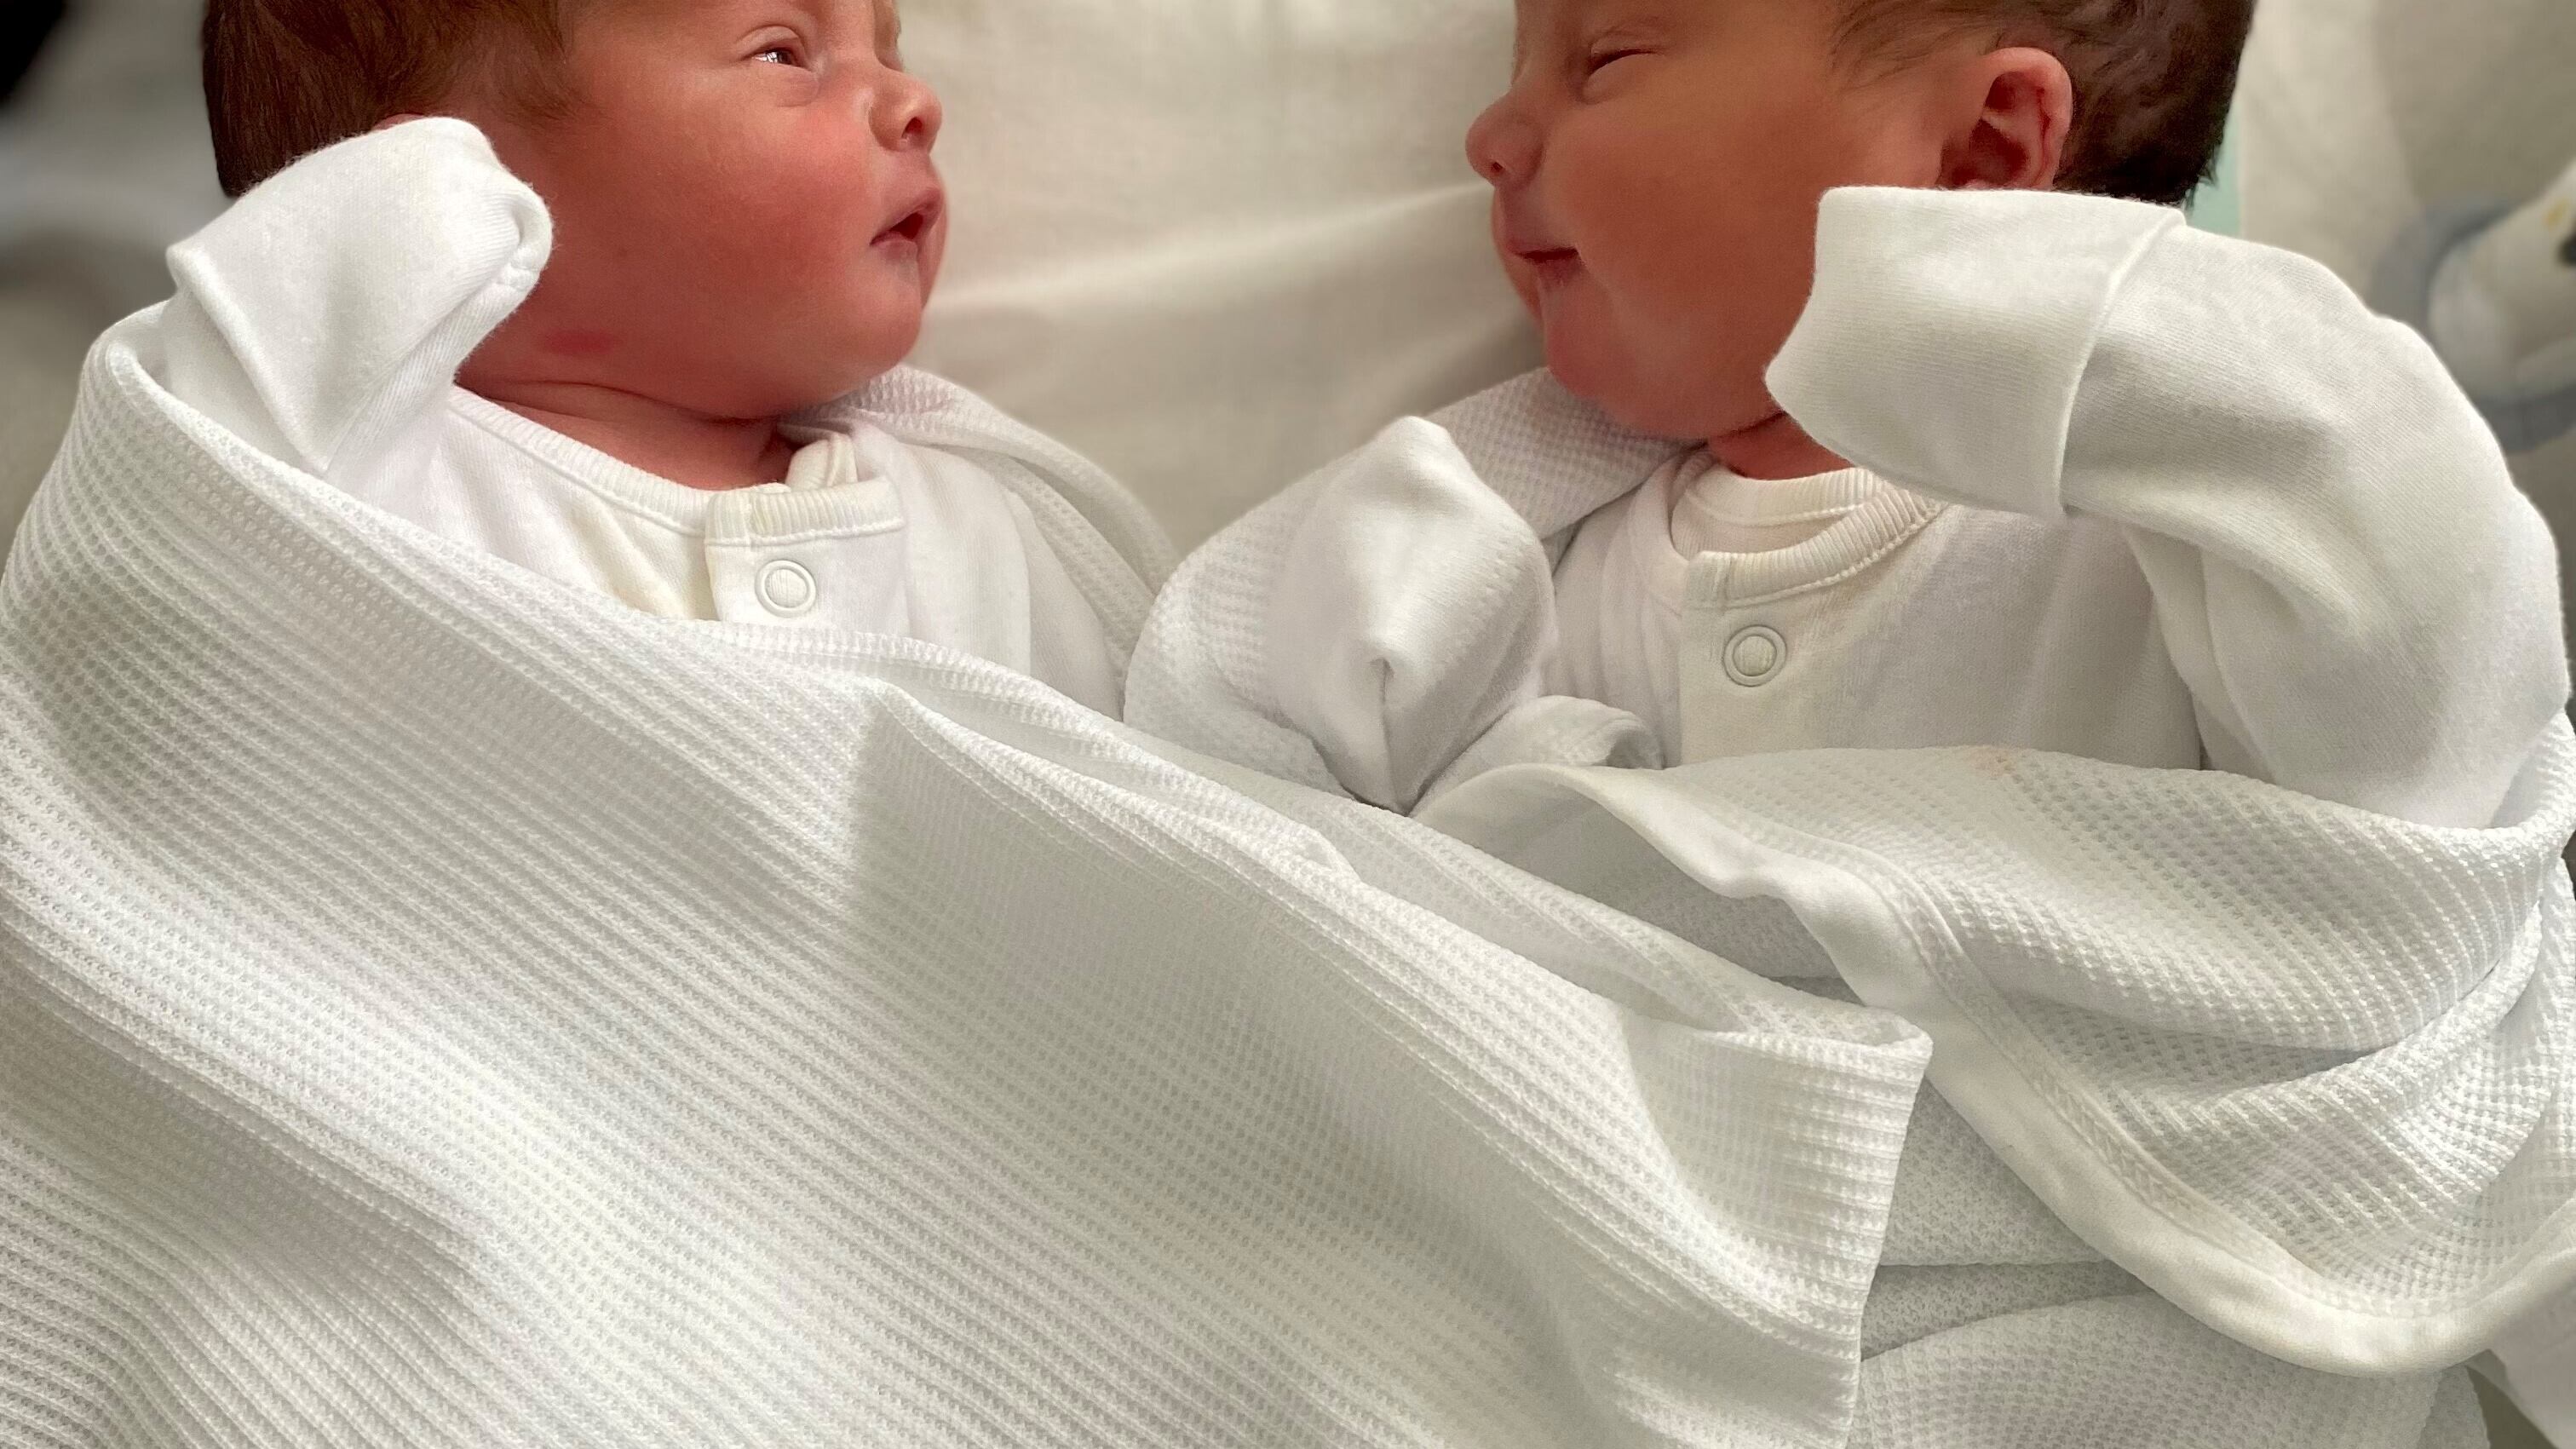 The Kelly twins born at the Ulster Hospital on Wednesday 